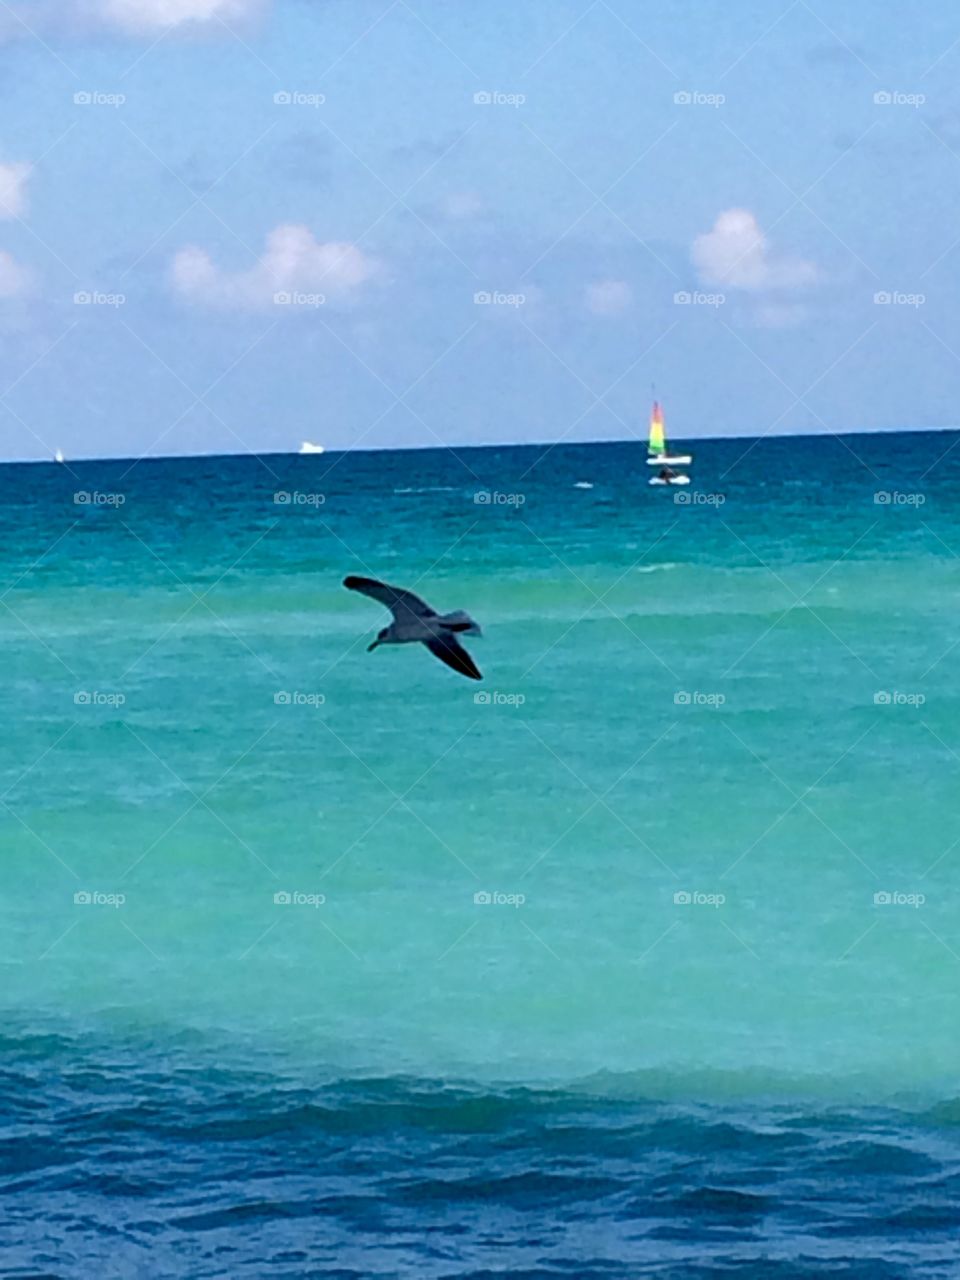 Florida Oceans. Had to take a photo of the ocean with the sail boat and bird! 